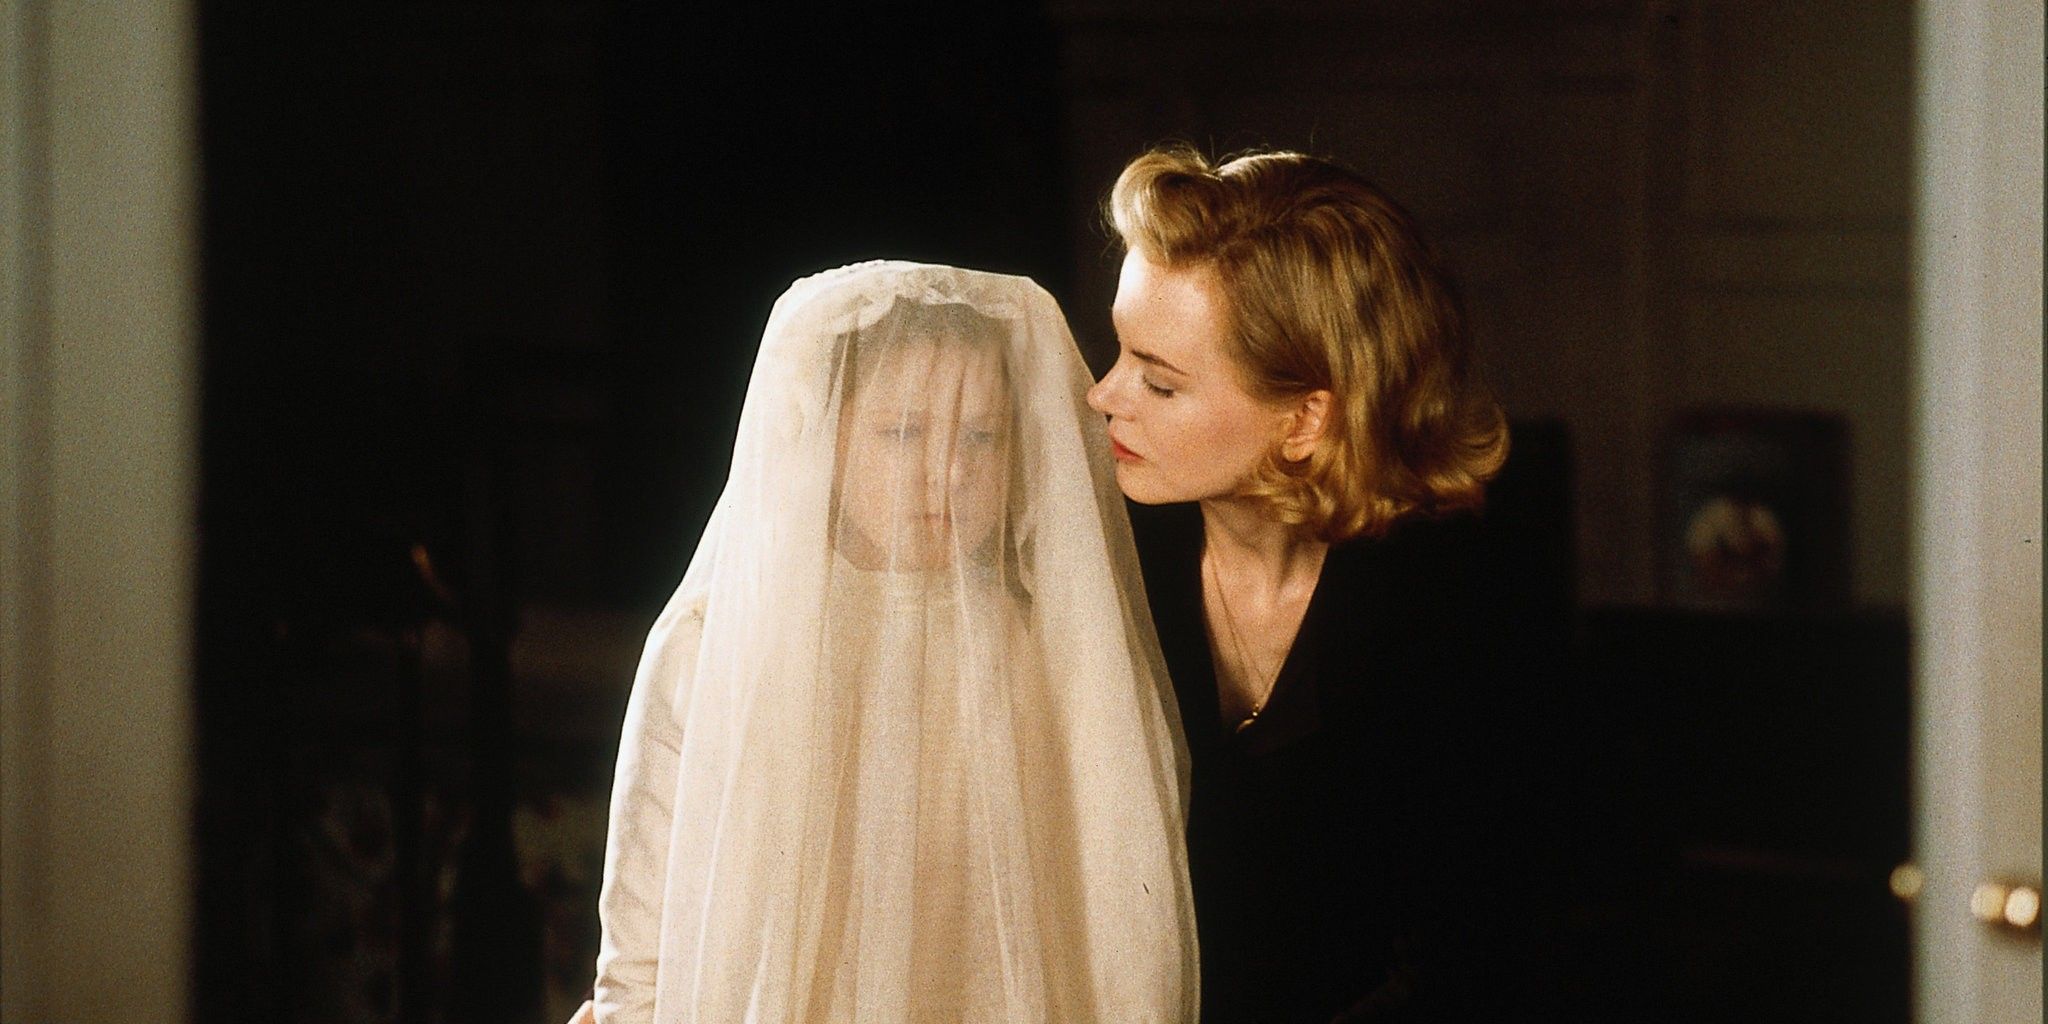 Grace dresses her daughter in her first communion dress in the horror film, The Others